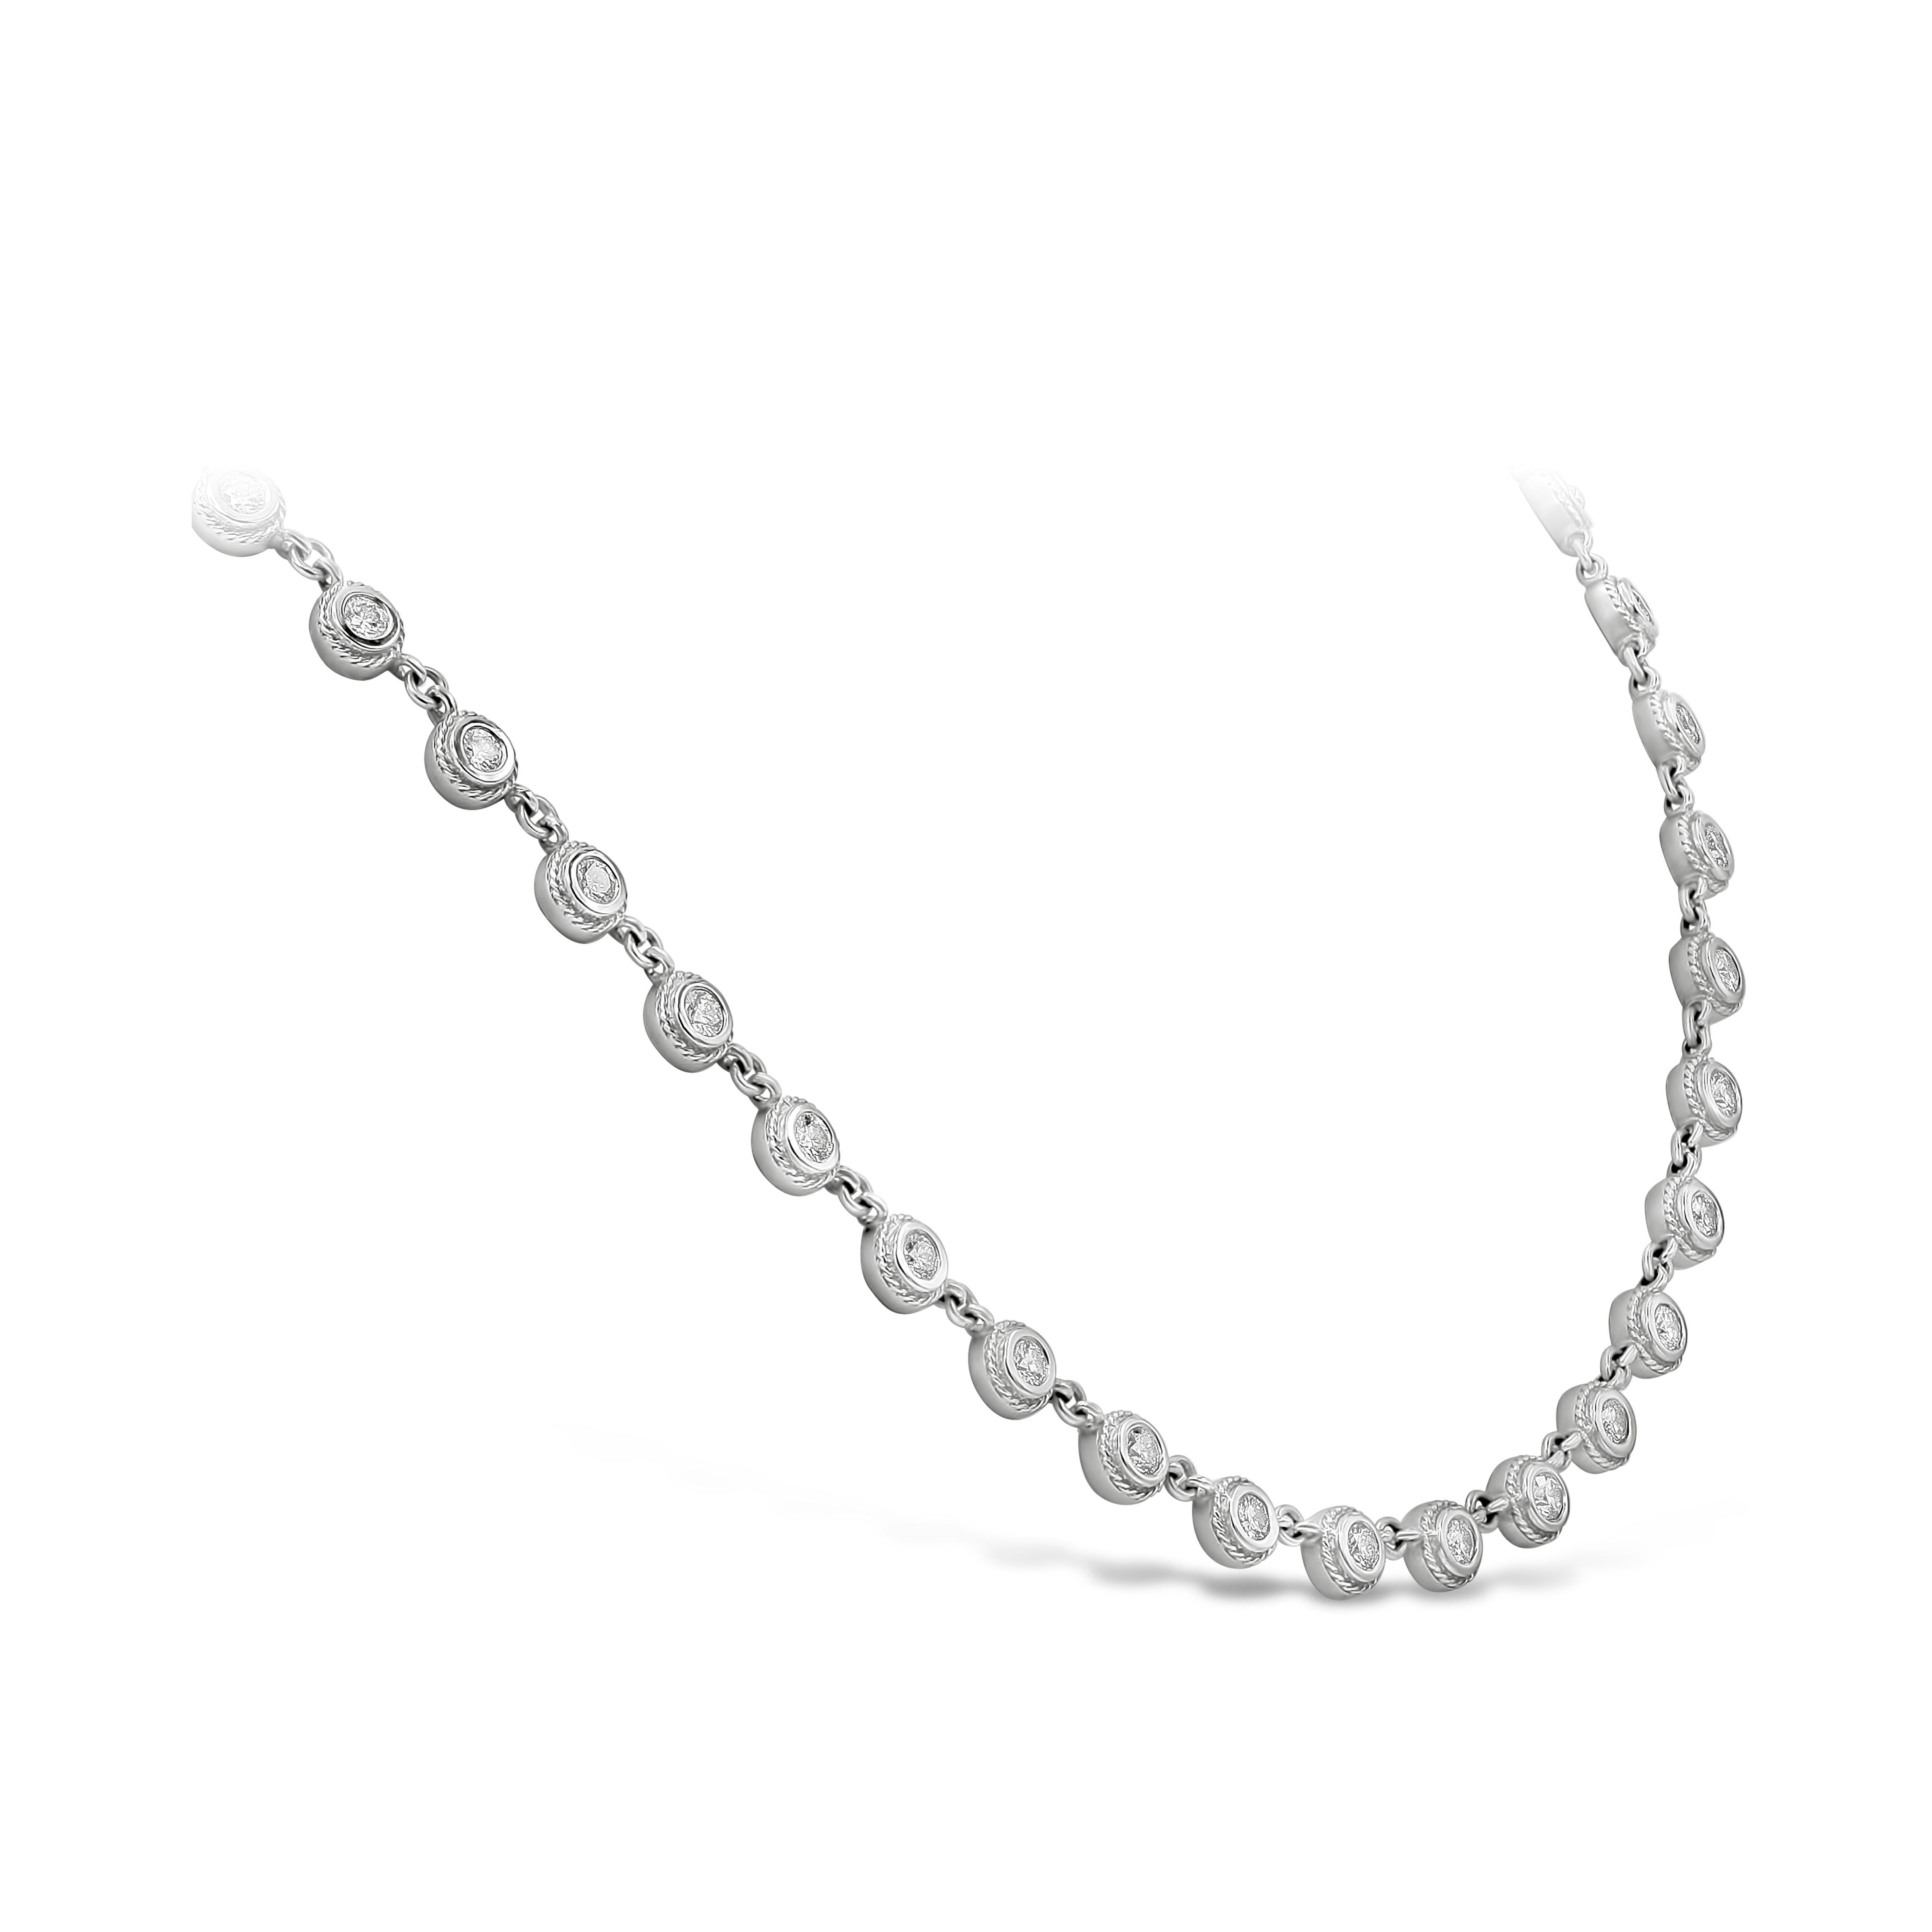 An antique style diamonds by the yard necklace showcasing a row of round brilliant diamonds, set in a rope design bezel made in 18k white gold. Each diamond is spaced evenly on an 18 inch white gold chain. Diamonds weigh 2.03 carats total.

Style